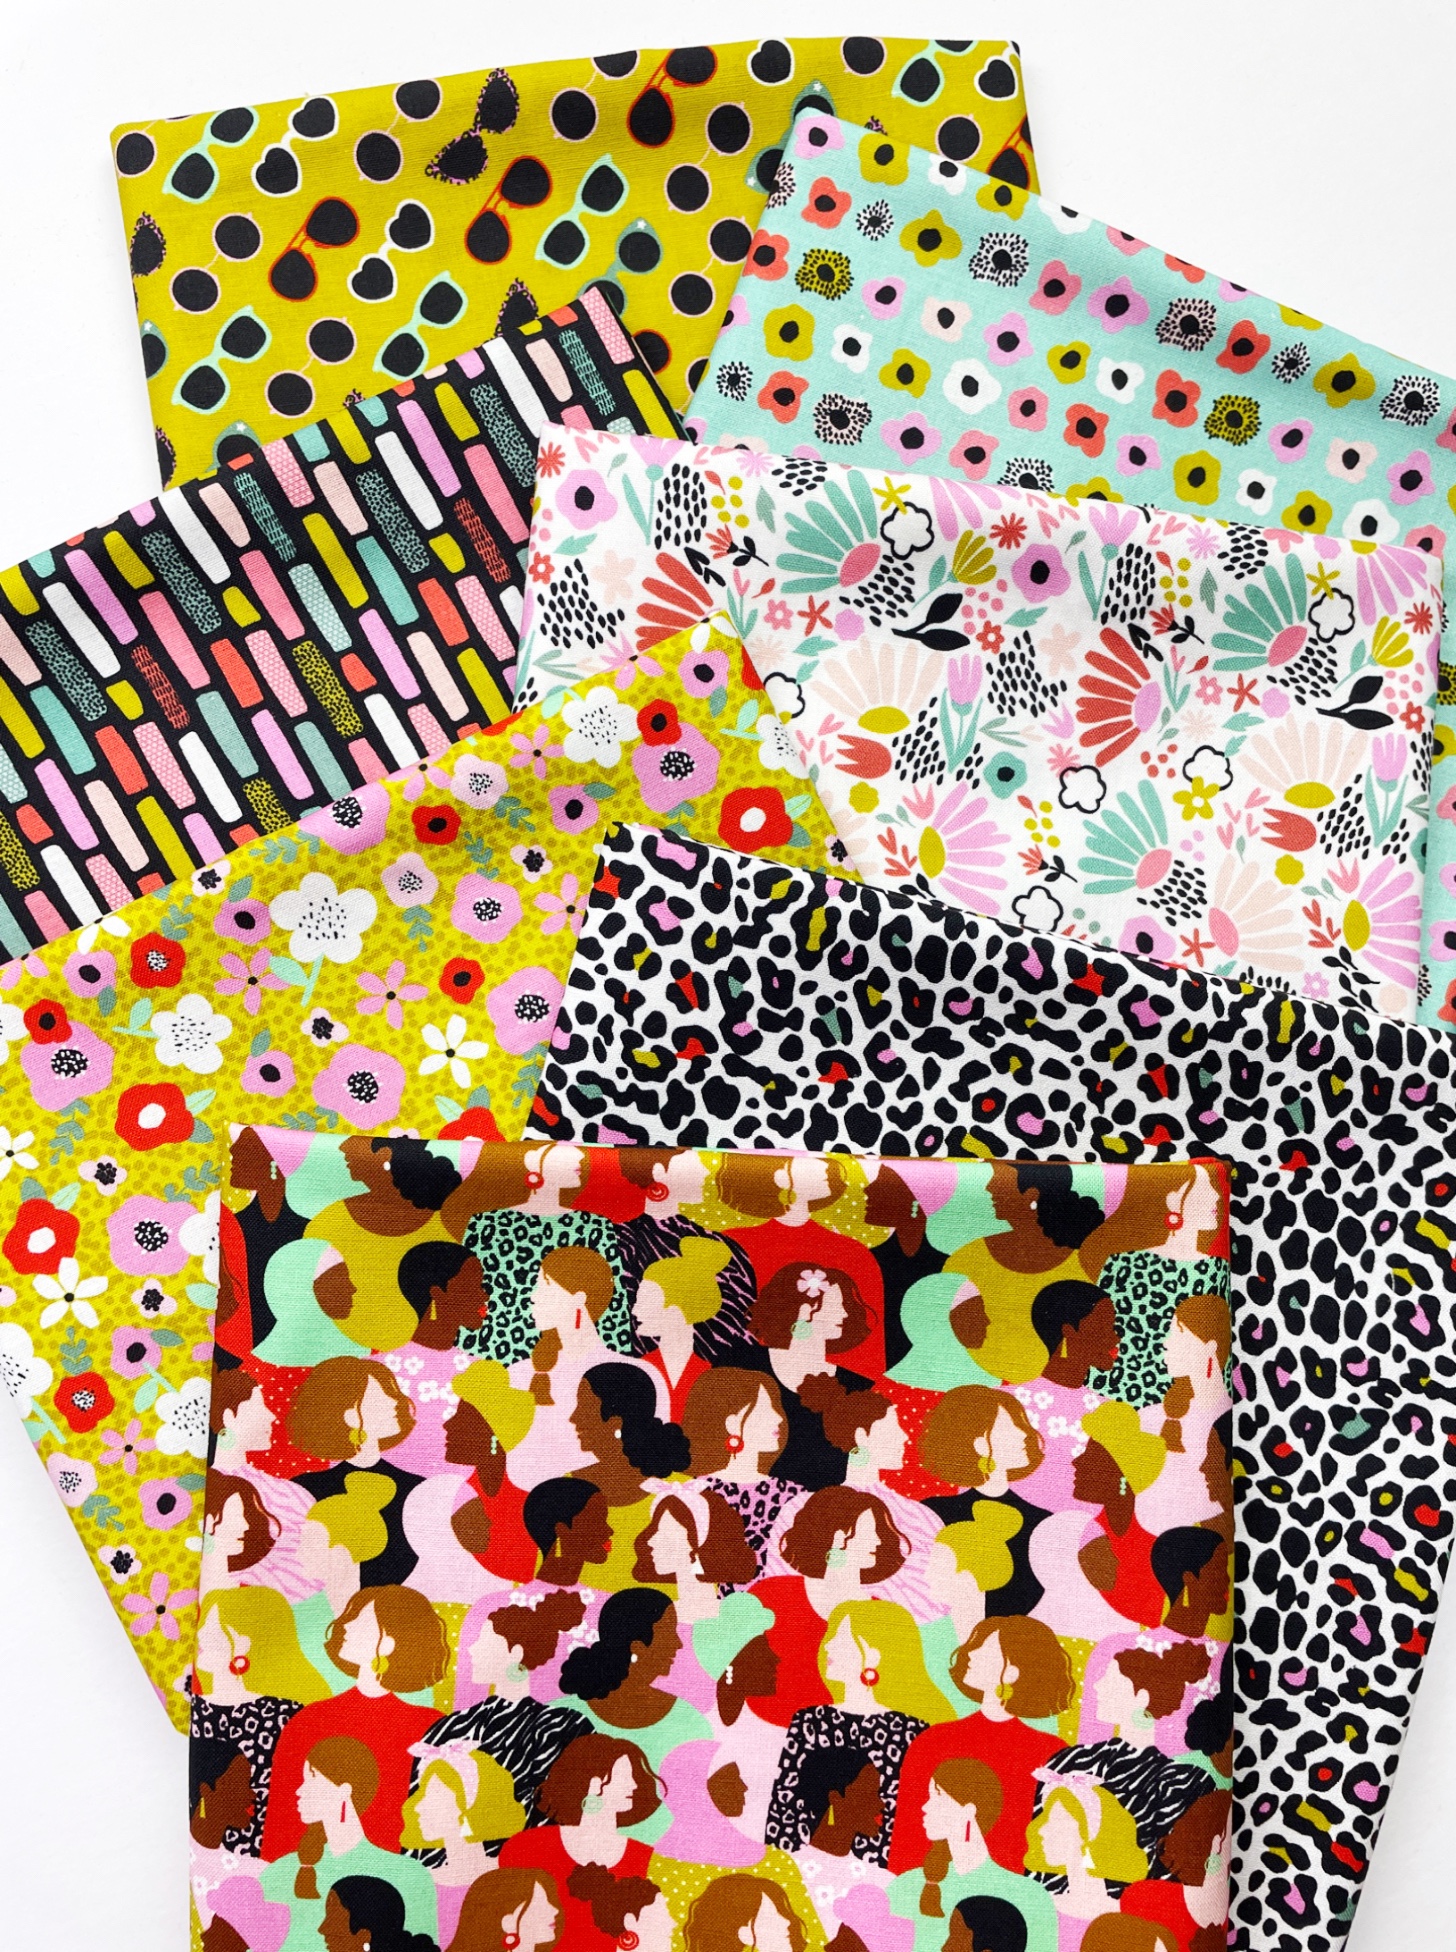 Quilting cotton fat quarters come in a massive range of prints, patterns and colours